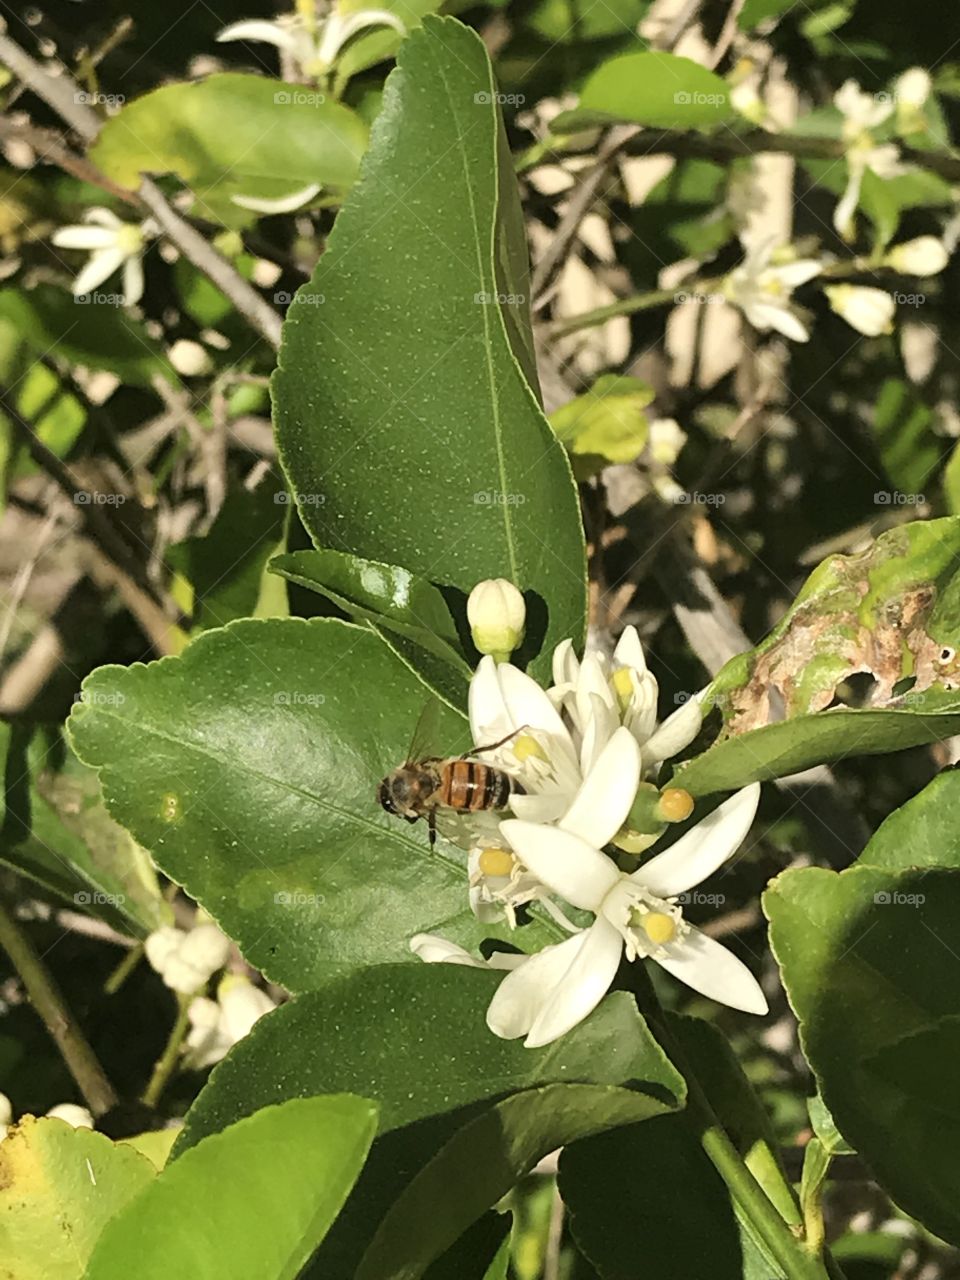 Bees pollinating a lime tree 🌳